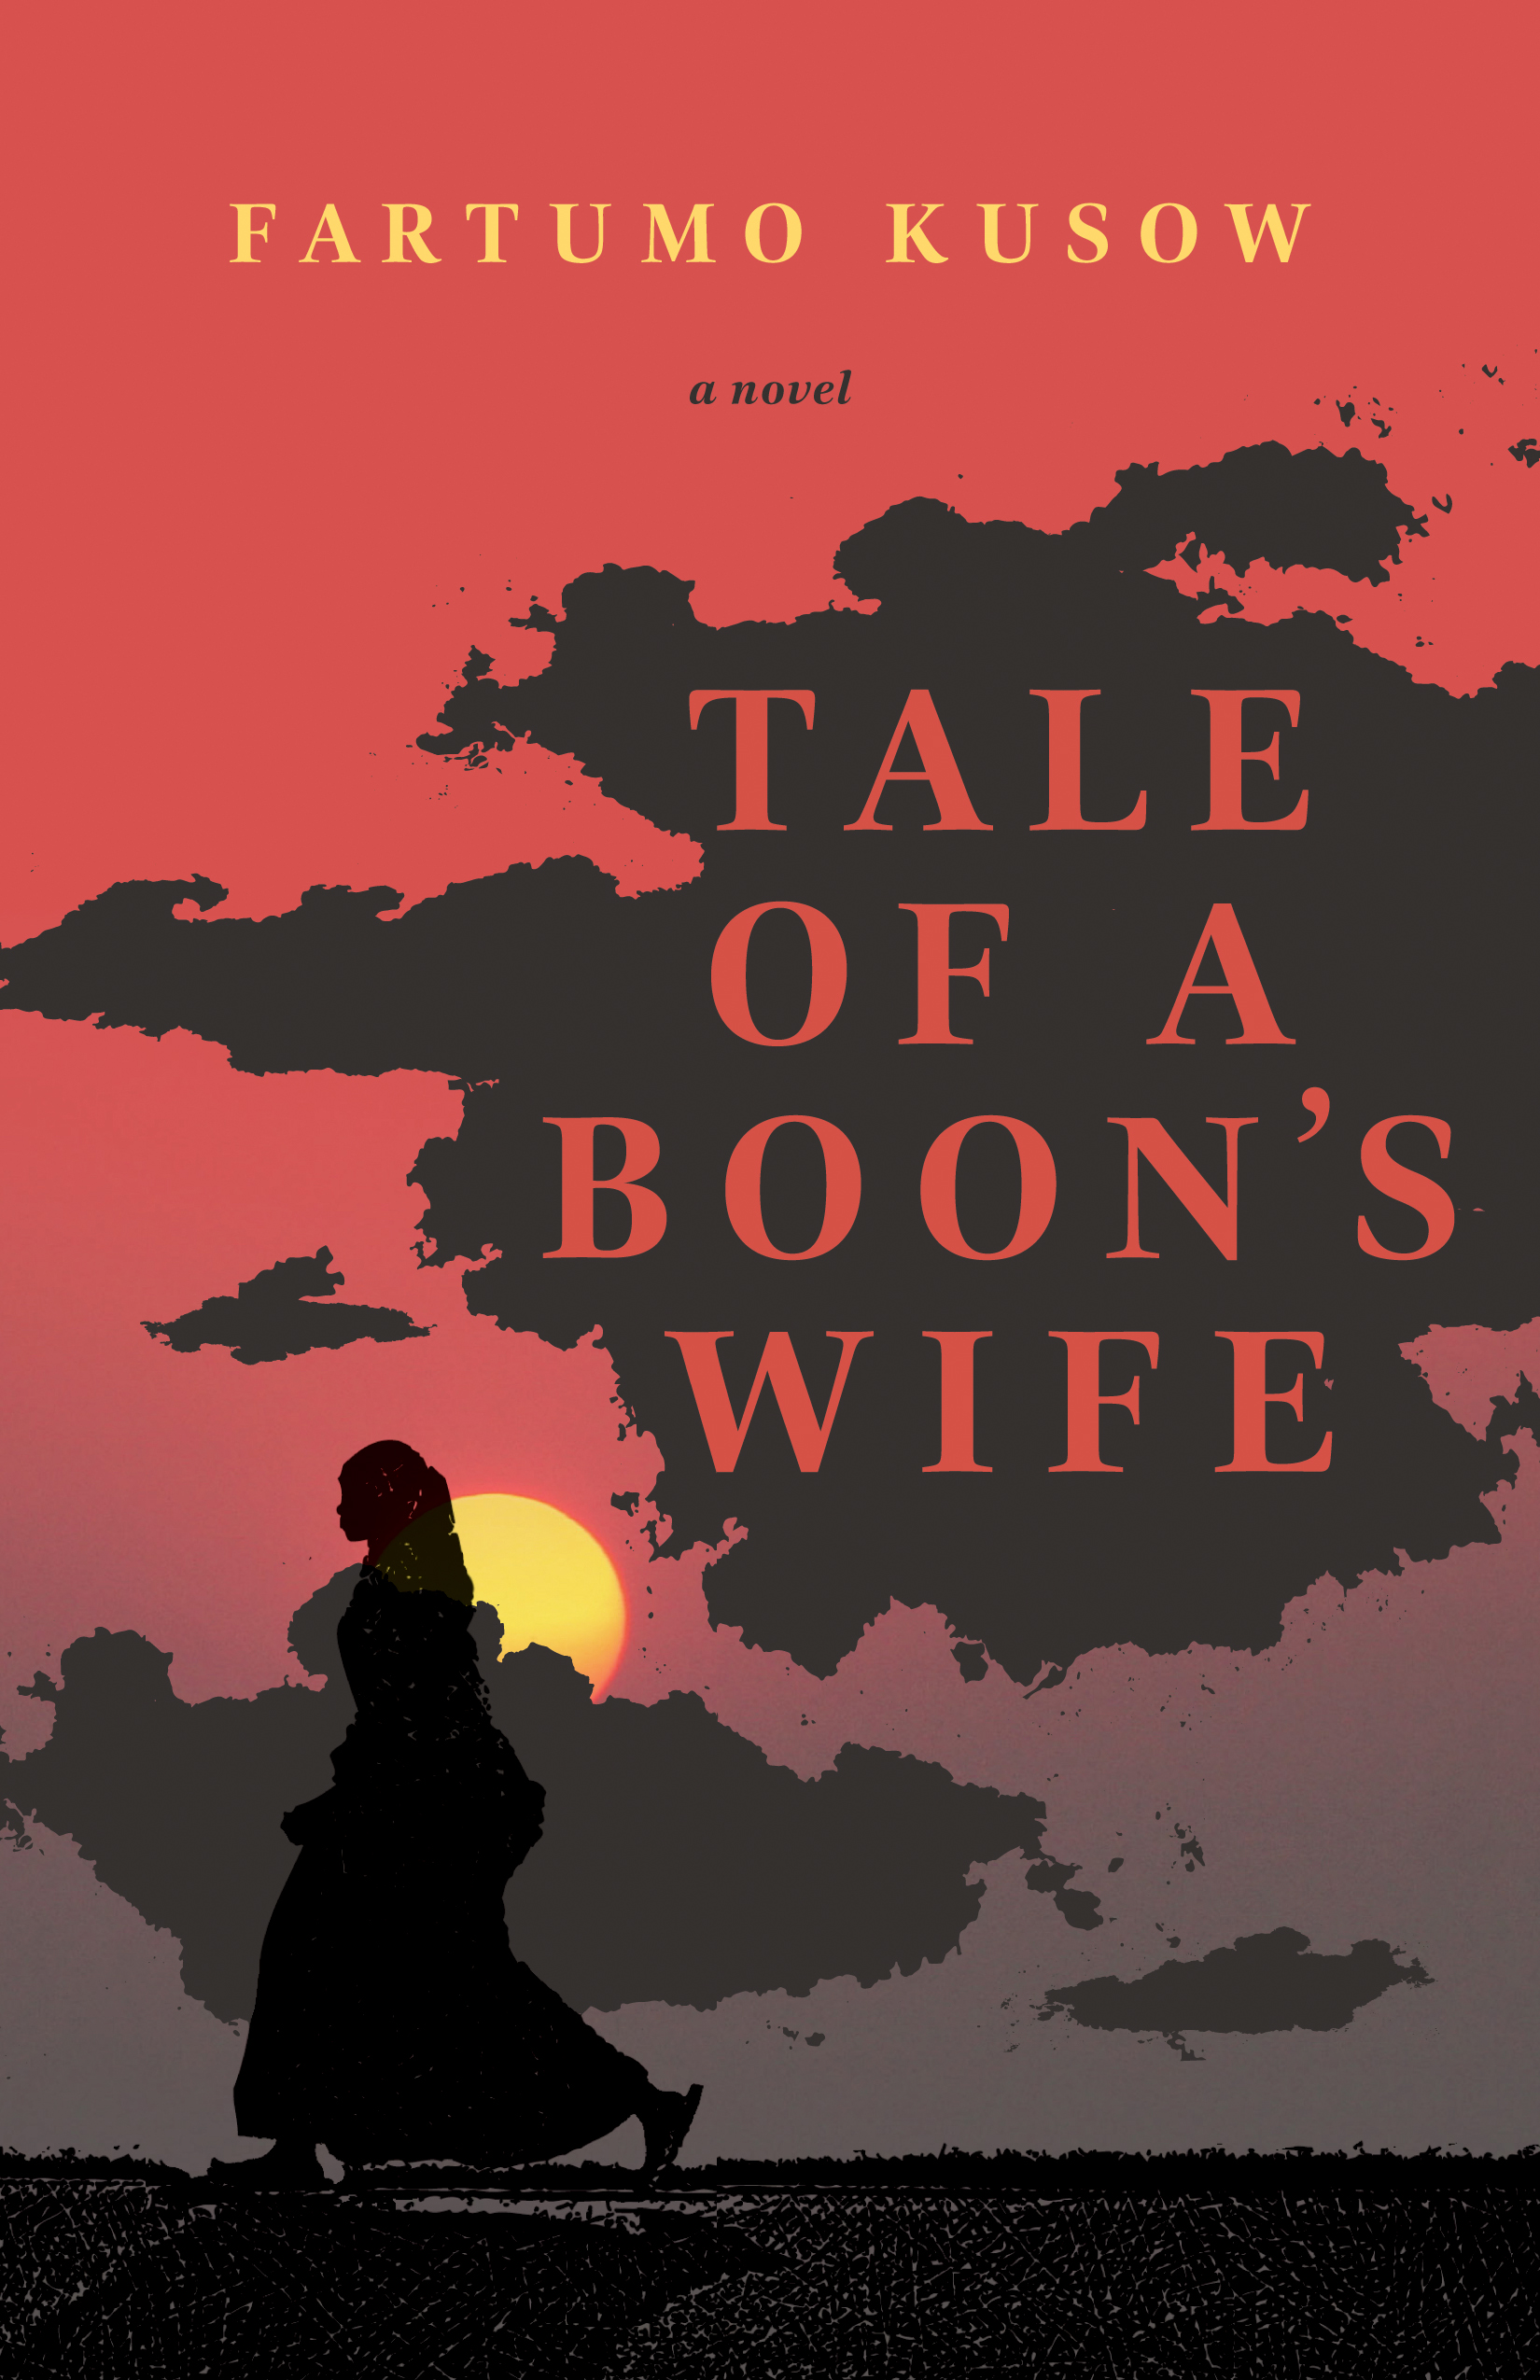 Tale of a Boon’s Wife